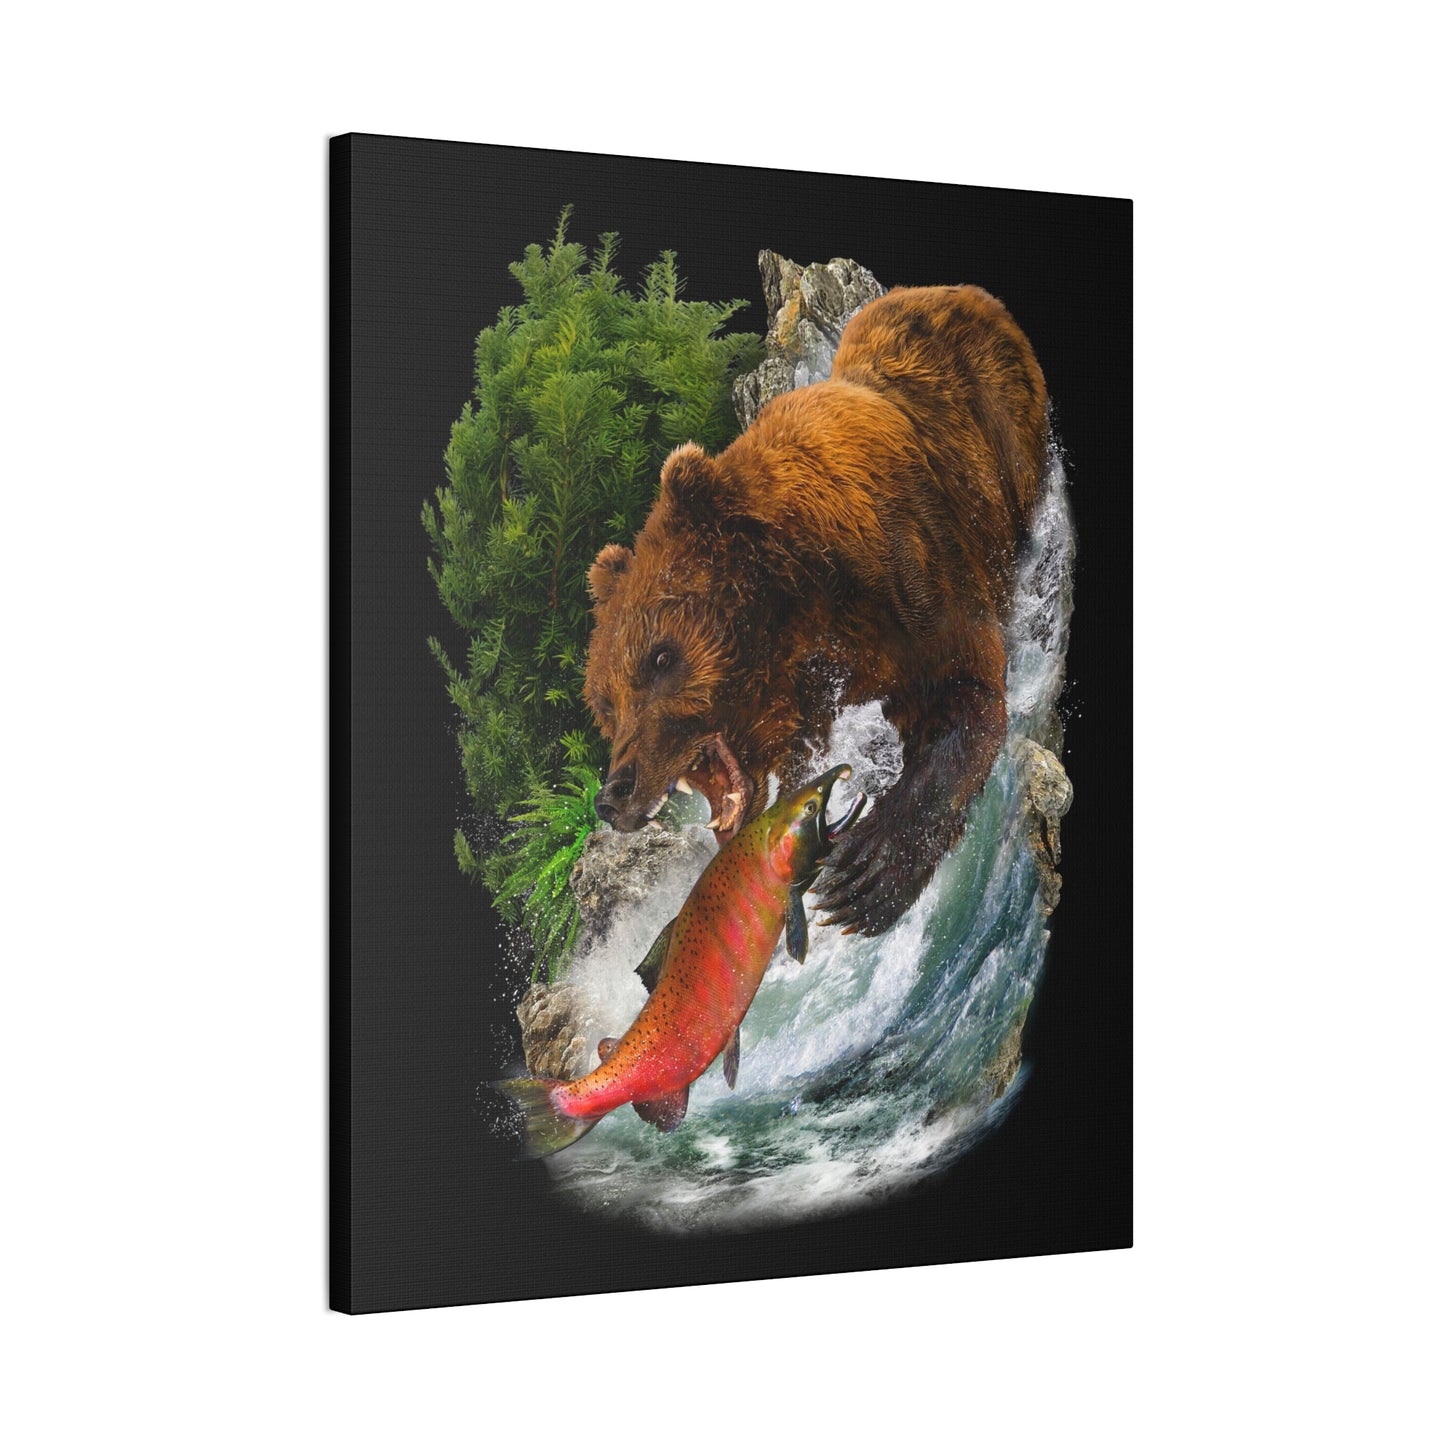 Grizzly & Salmon Canvas Wetlands Performance Apparel